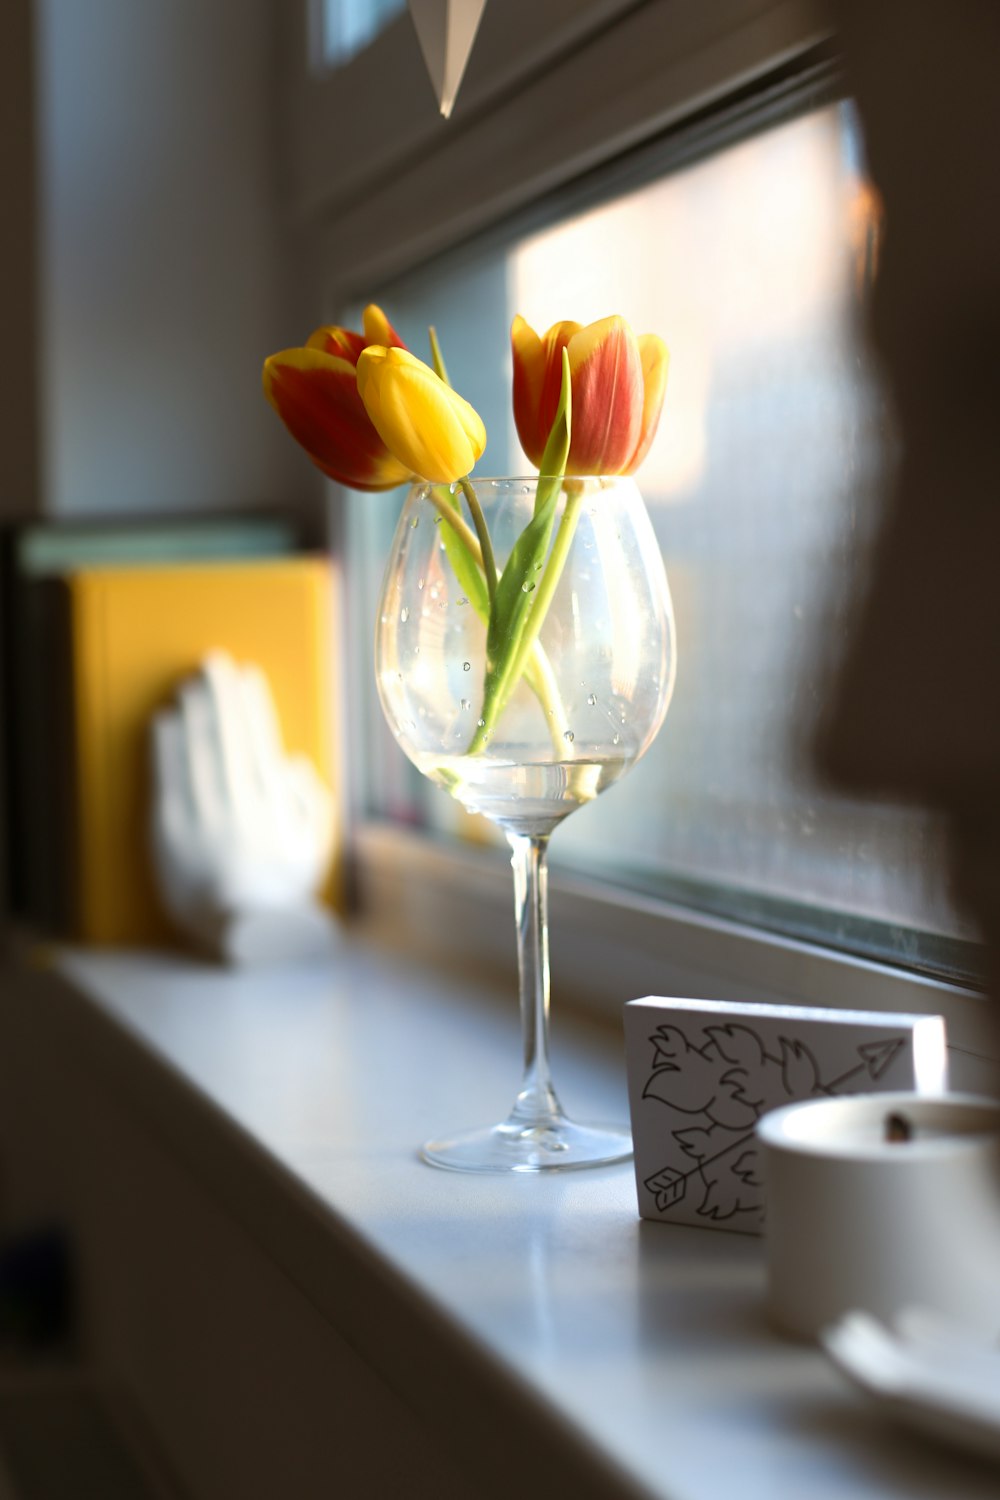 a window sill with a wine glass and a flower in it